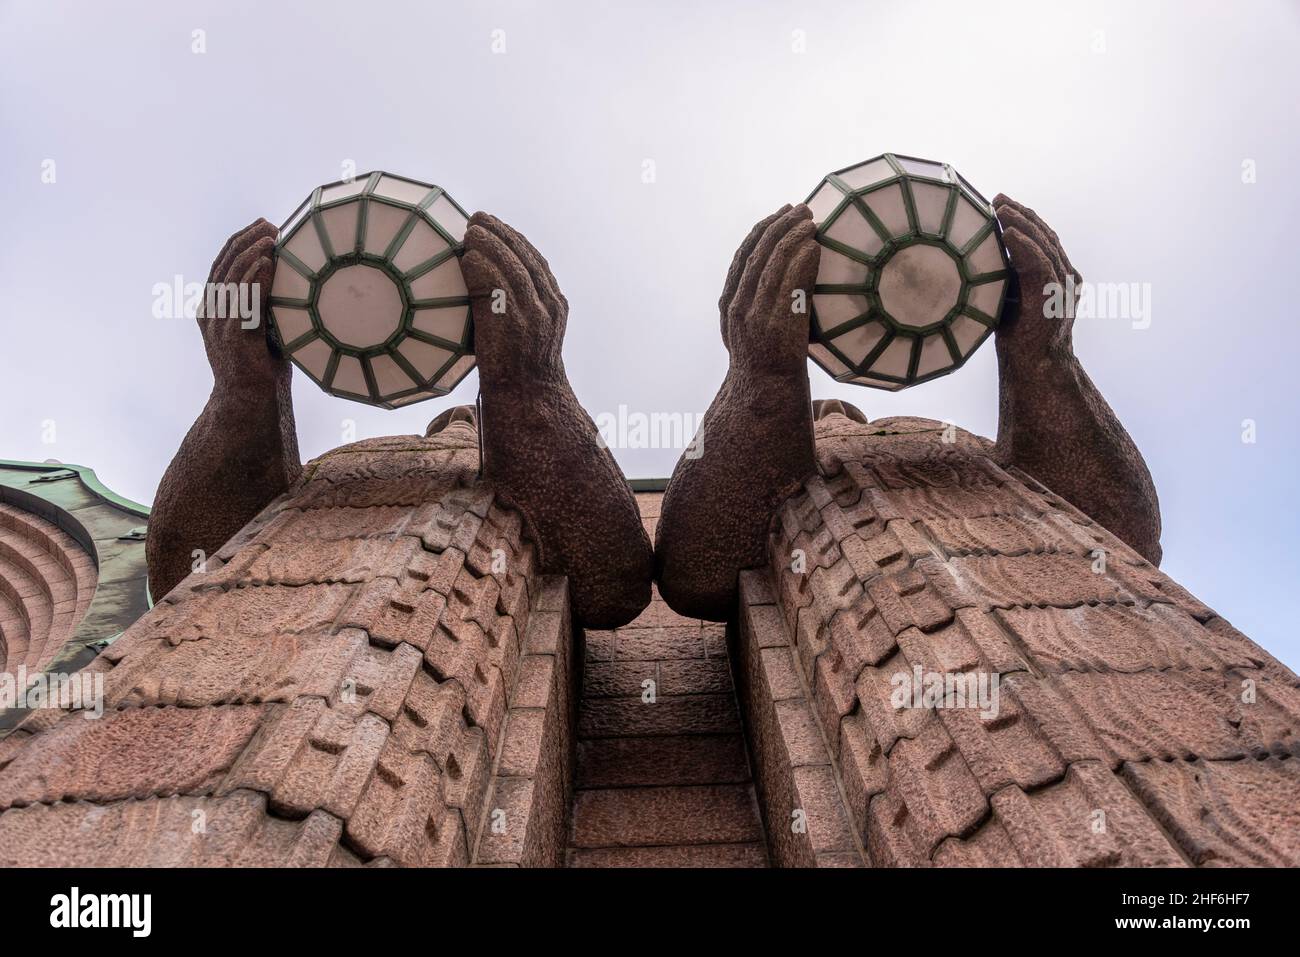 Finland,  Helsinki,  torchbearers at the Central Station,  granite figures by Emil Wikström. Stock Photo